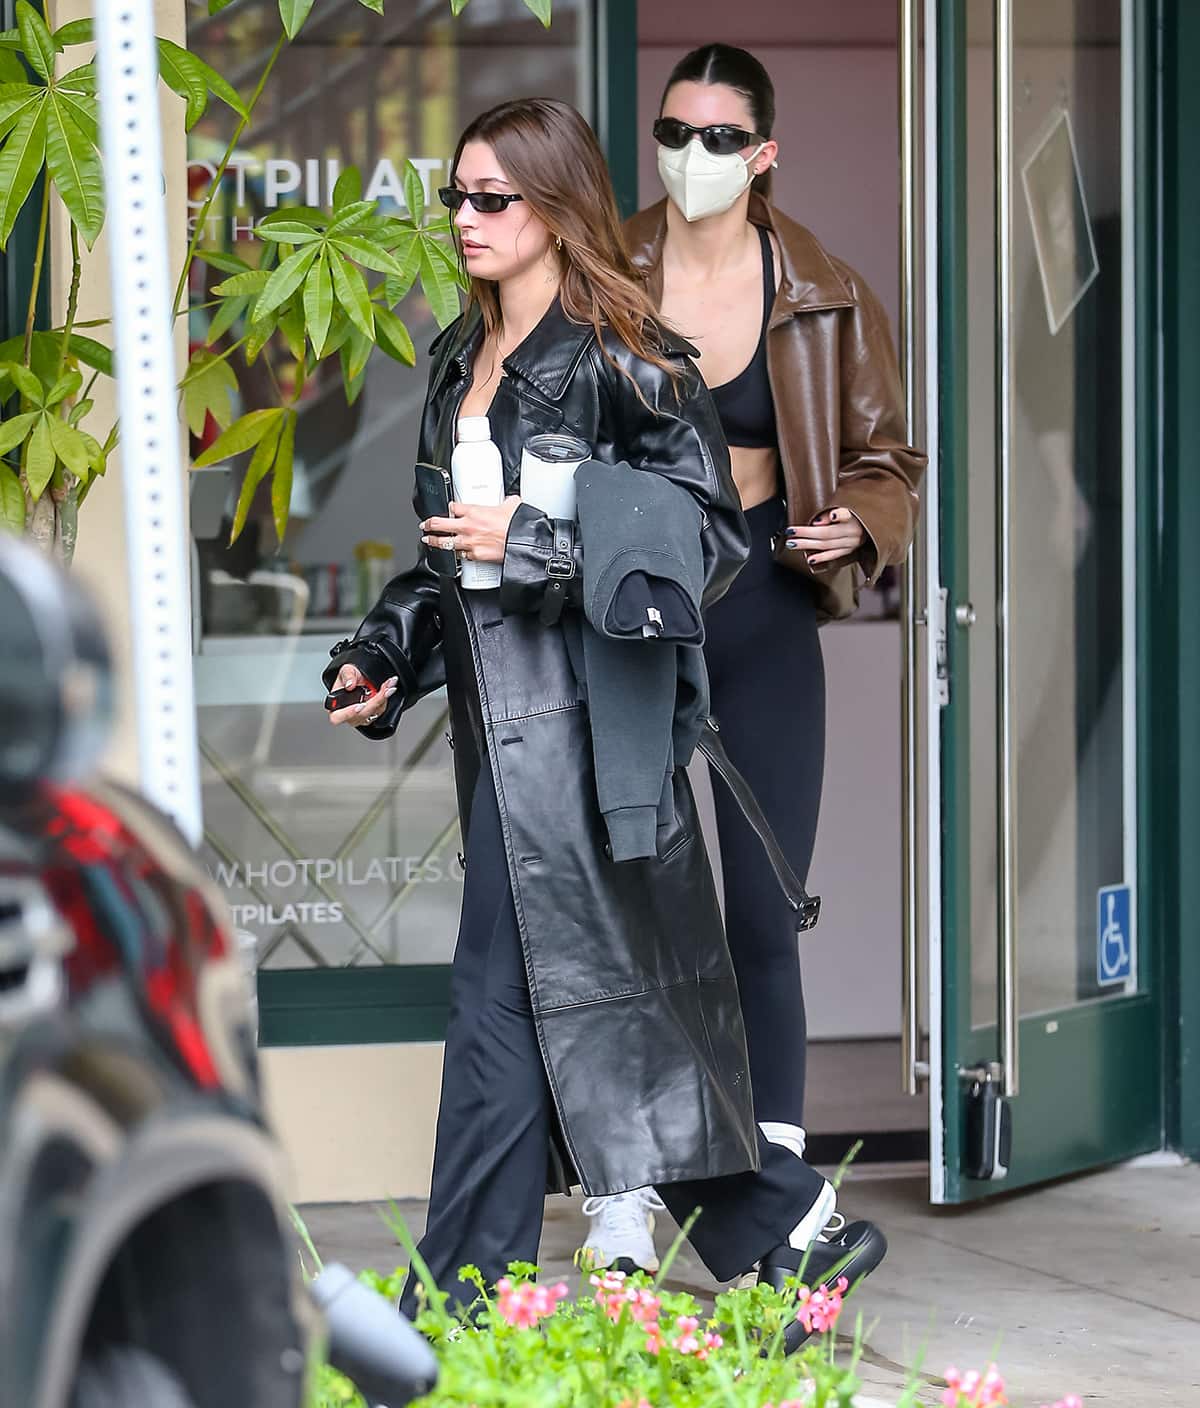 Hailey Bieber and Kendall Jenner wear leather coats to Pilates class at Get Hot in West Hollywood on January 3, 2023